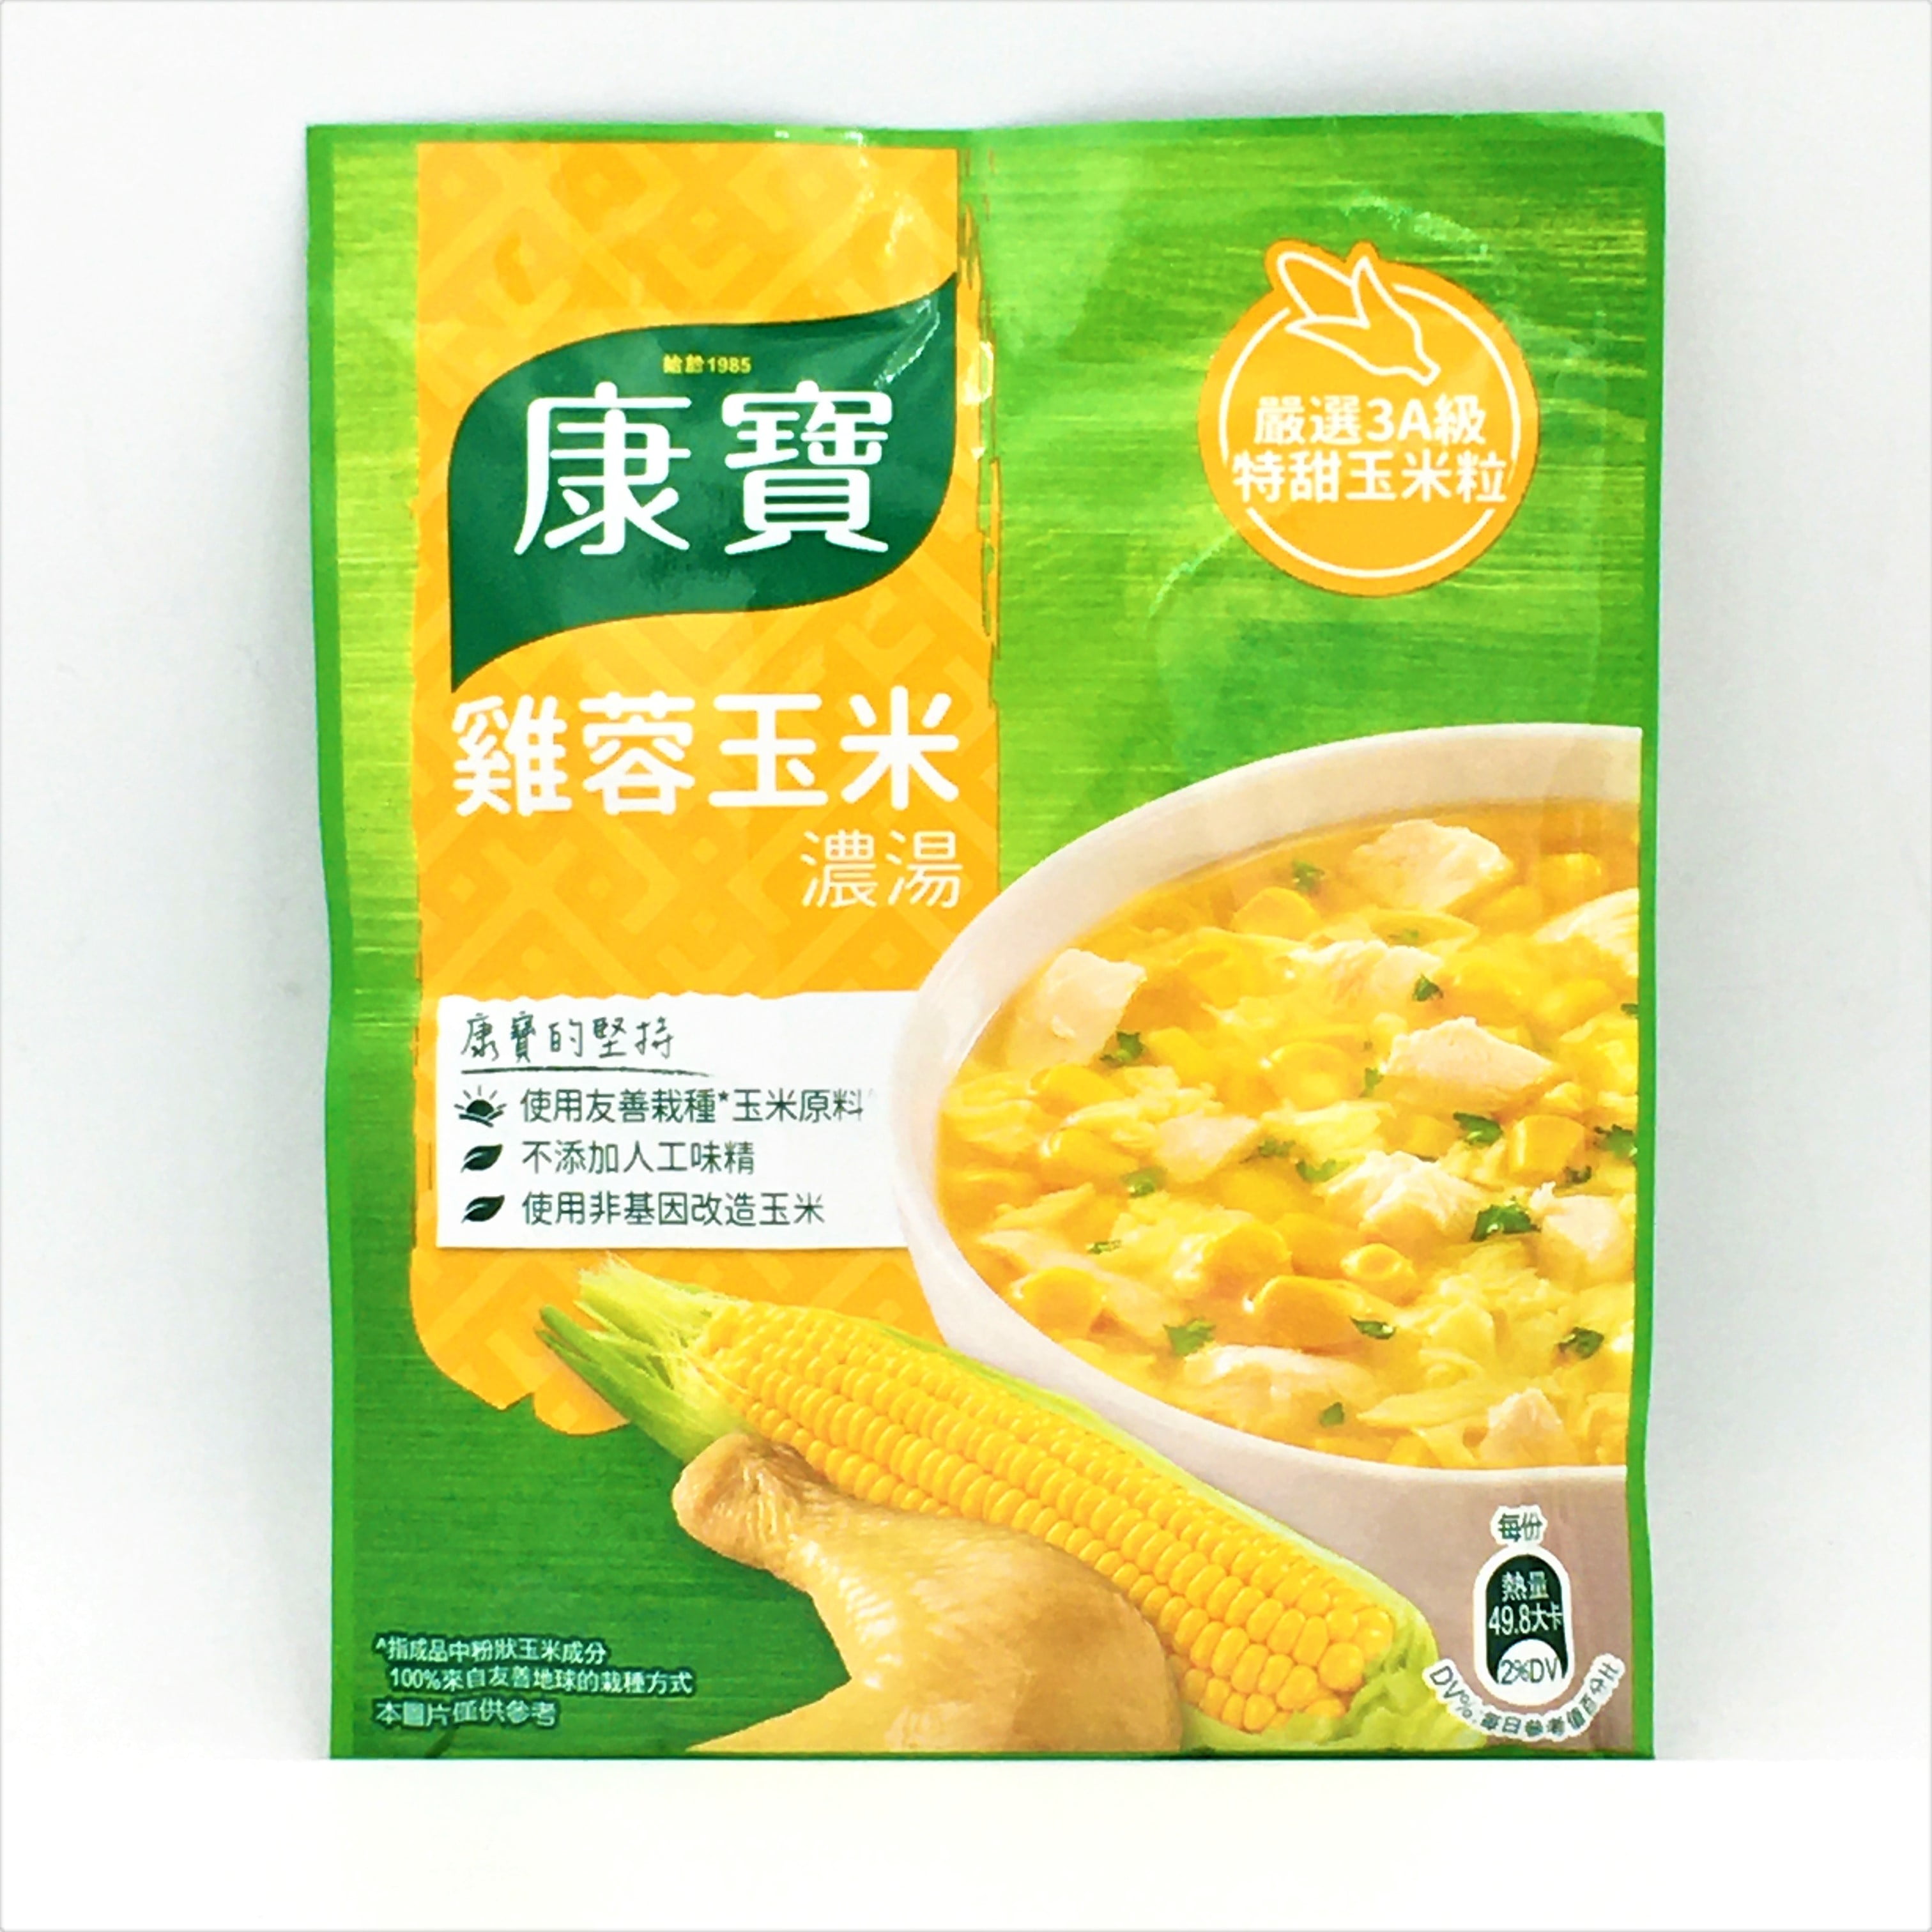 chinese corn soup powder in a yellow can review｜TikTok Search